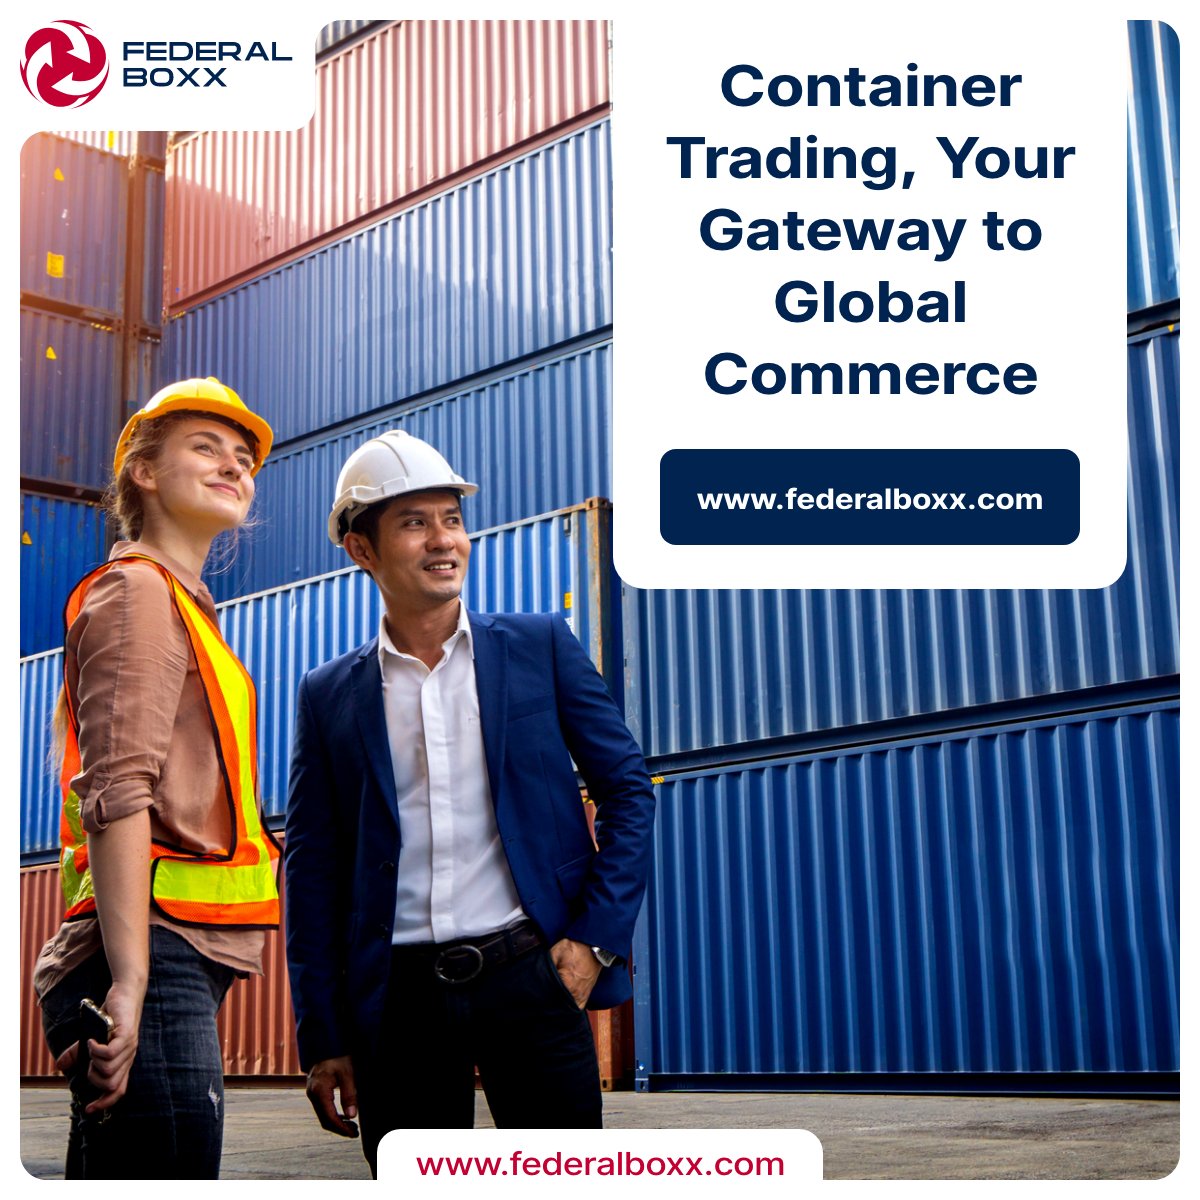 Unlock global commerce opportunities through container trading with FederalBoxx! Seamlessly connect with partners worldwide and expand your business horizons. Join us today and open the door to endless possibilities! #FederalBoxx #ContainerTrading #GlobalCommerce